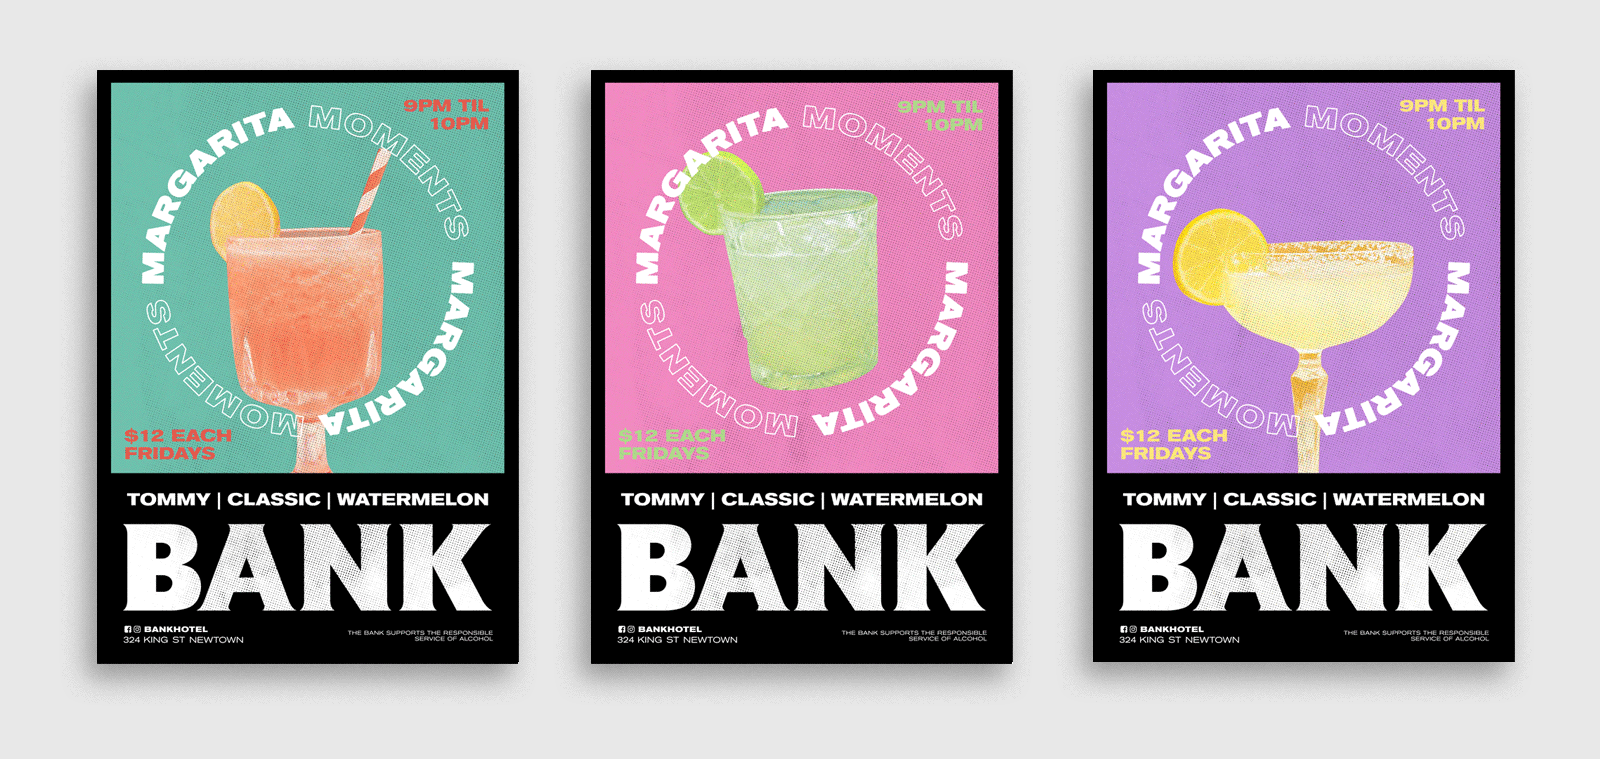 graphic design agency sydney poster design for bank hotel newtown margarita moments tommy classic